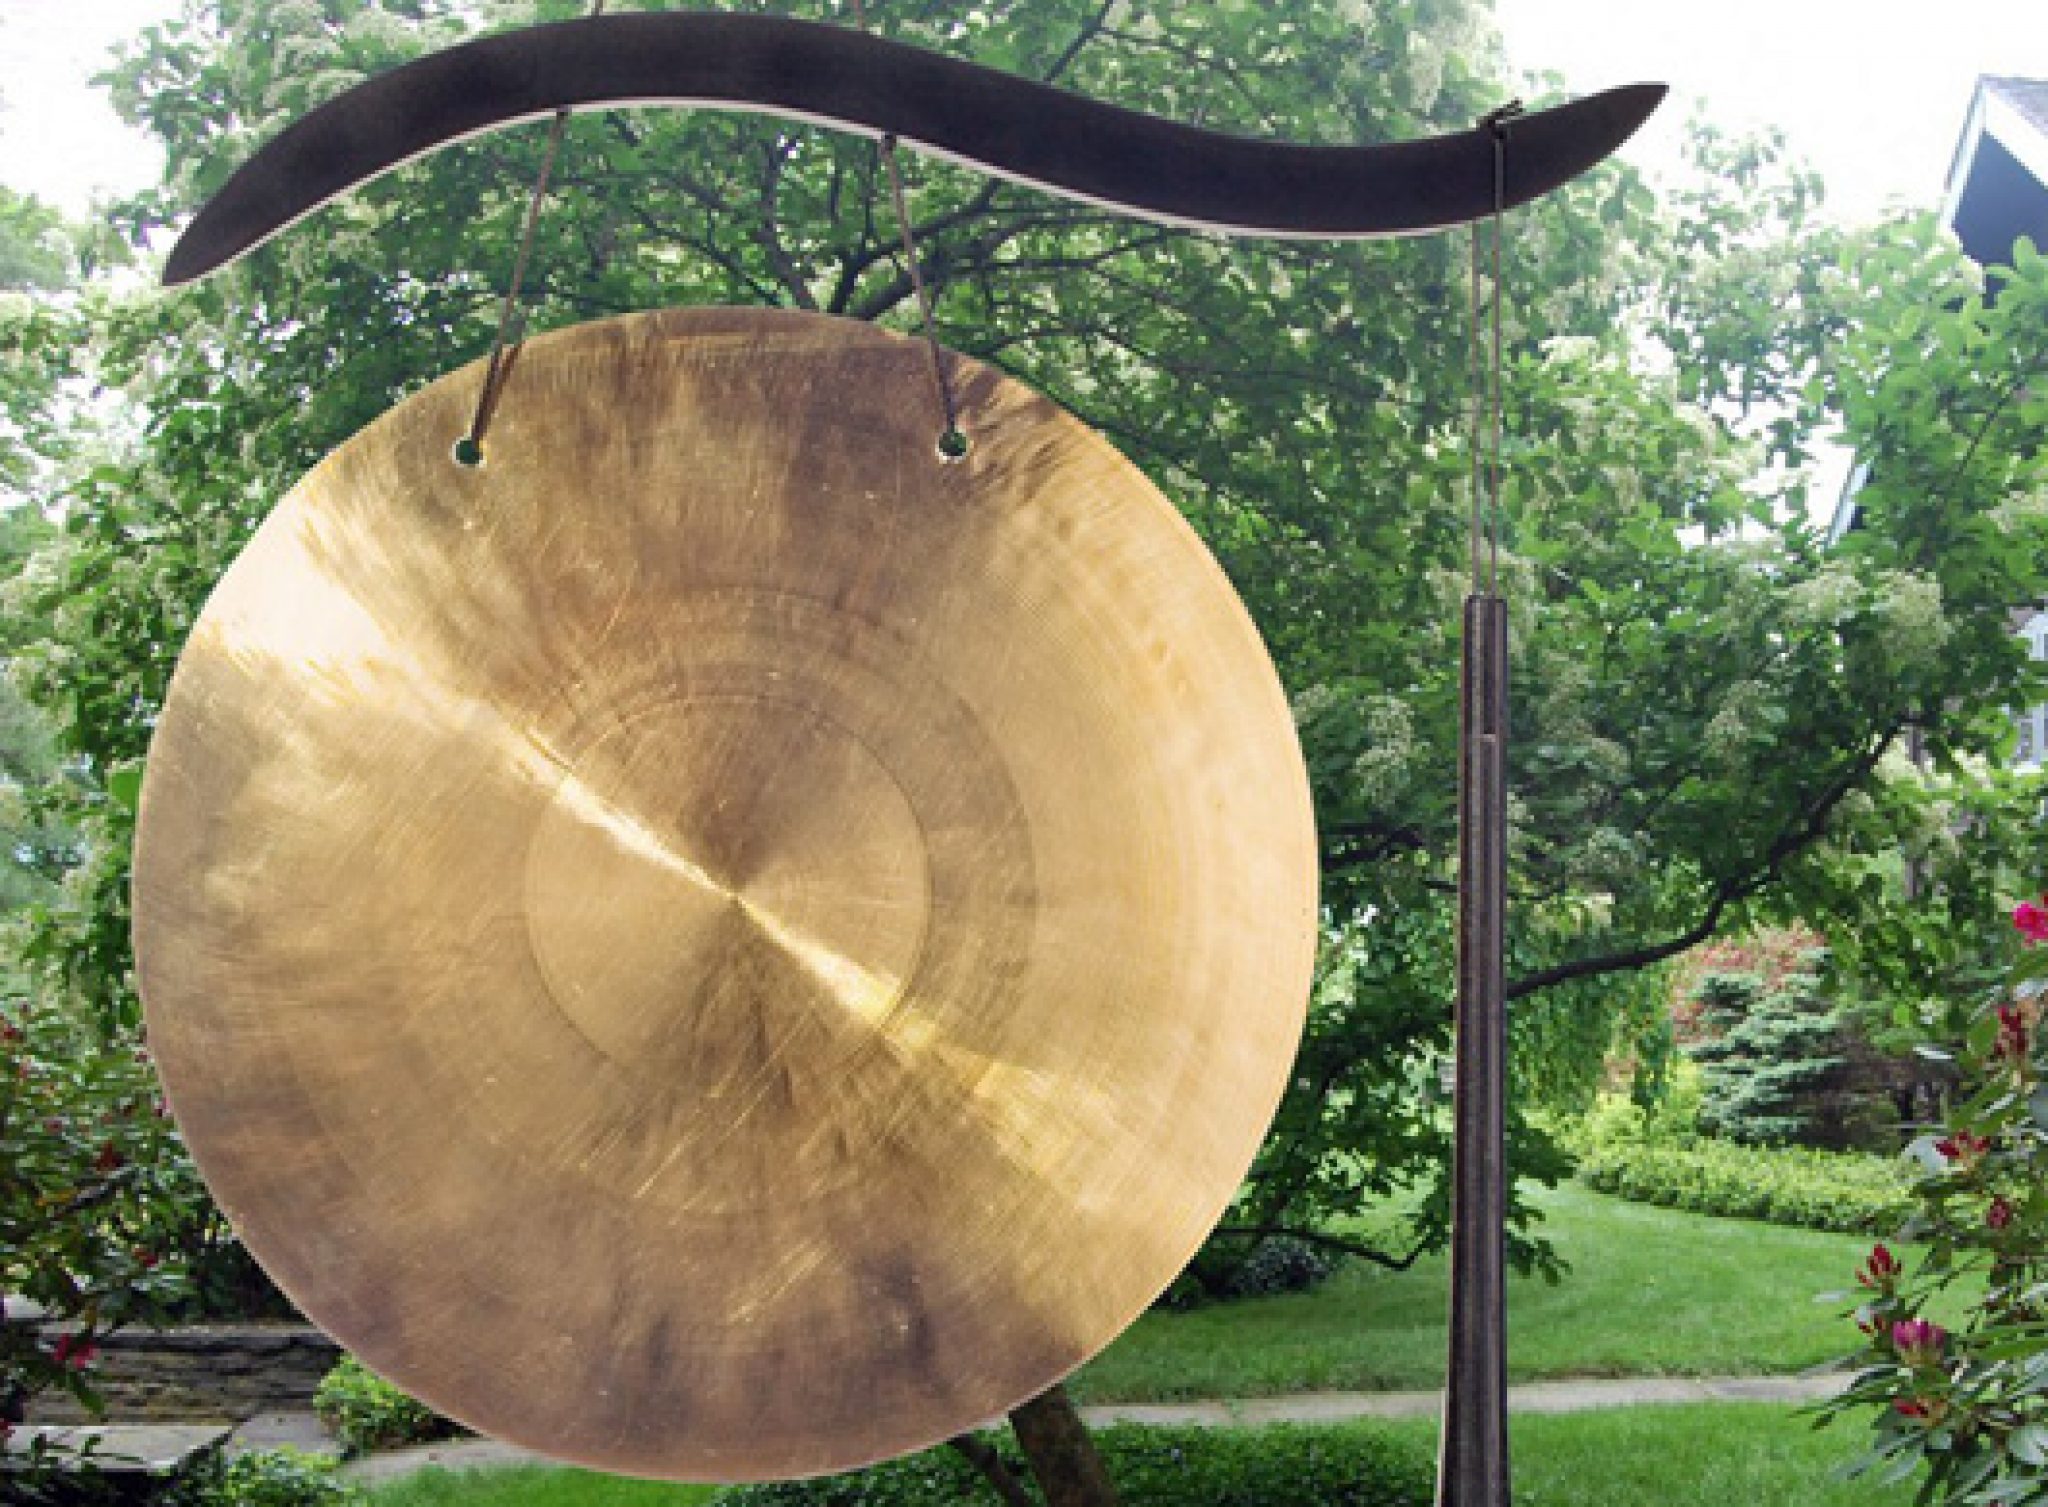 12" Gongs on the Eternal Present Gong Stand - Gongs Unlimited